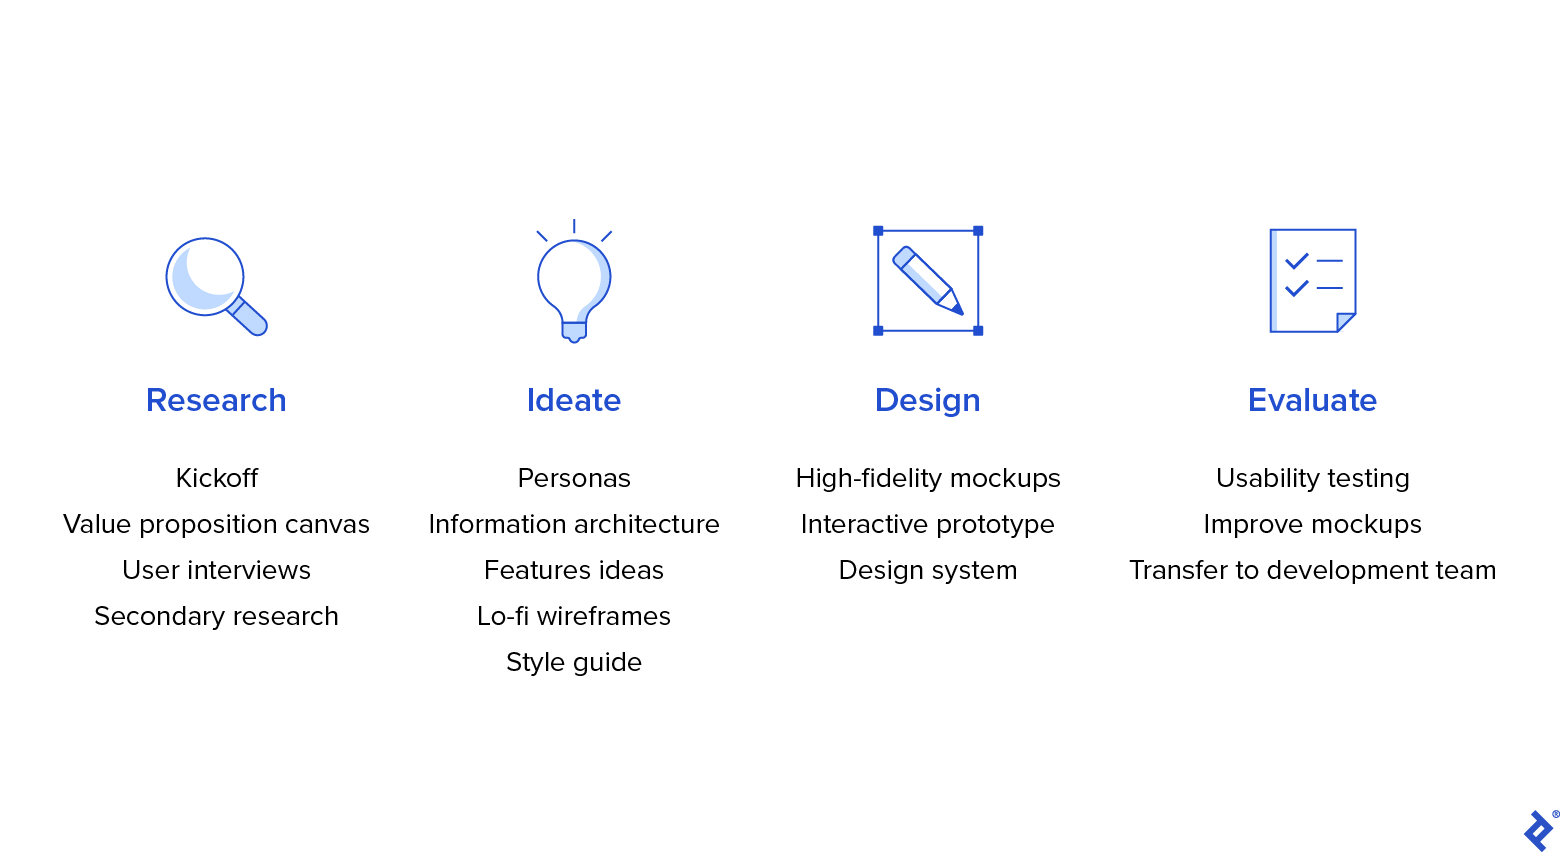 A list of steps to take during the design process, divided into four columns: research, ideate, design, and evaluate. Under each is a list of actions that comprise each step. Under “research” the list reads: online kickoff, value proposition, canvas, user interviews, secondary research. Under “ideate” the list reads: personas, information architecture, features ideas, lo-fi wireframes, style guide. Under “design” the list says: high-fidelity mockups, interactive prototype, and design system. Under “evaluate” the list reads: moderate usability testing, improve mockups, transfers to development team.